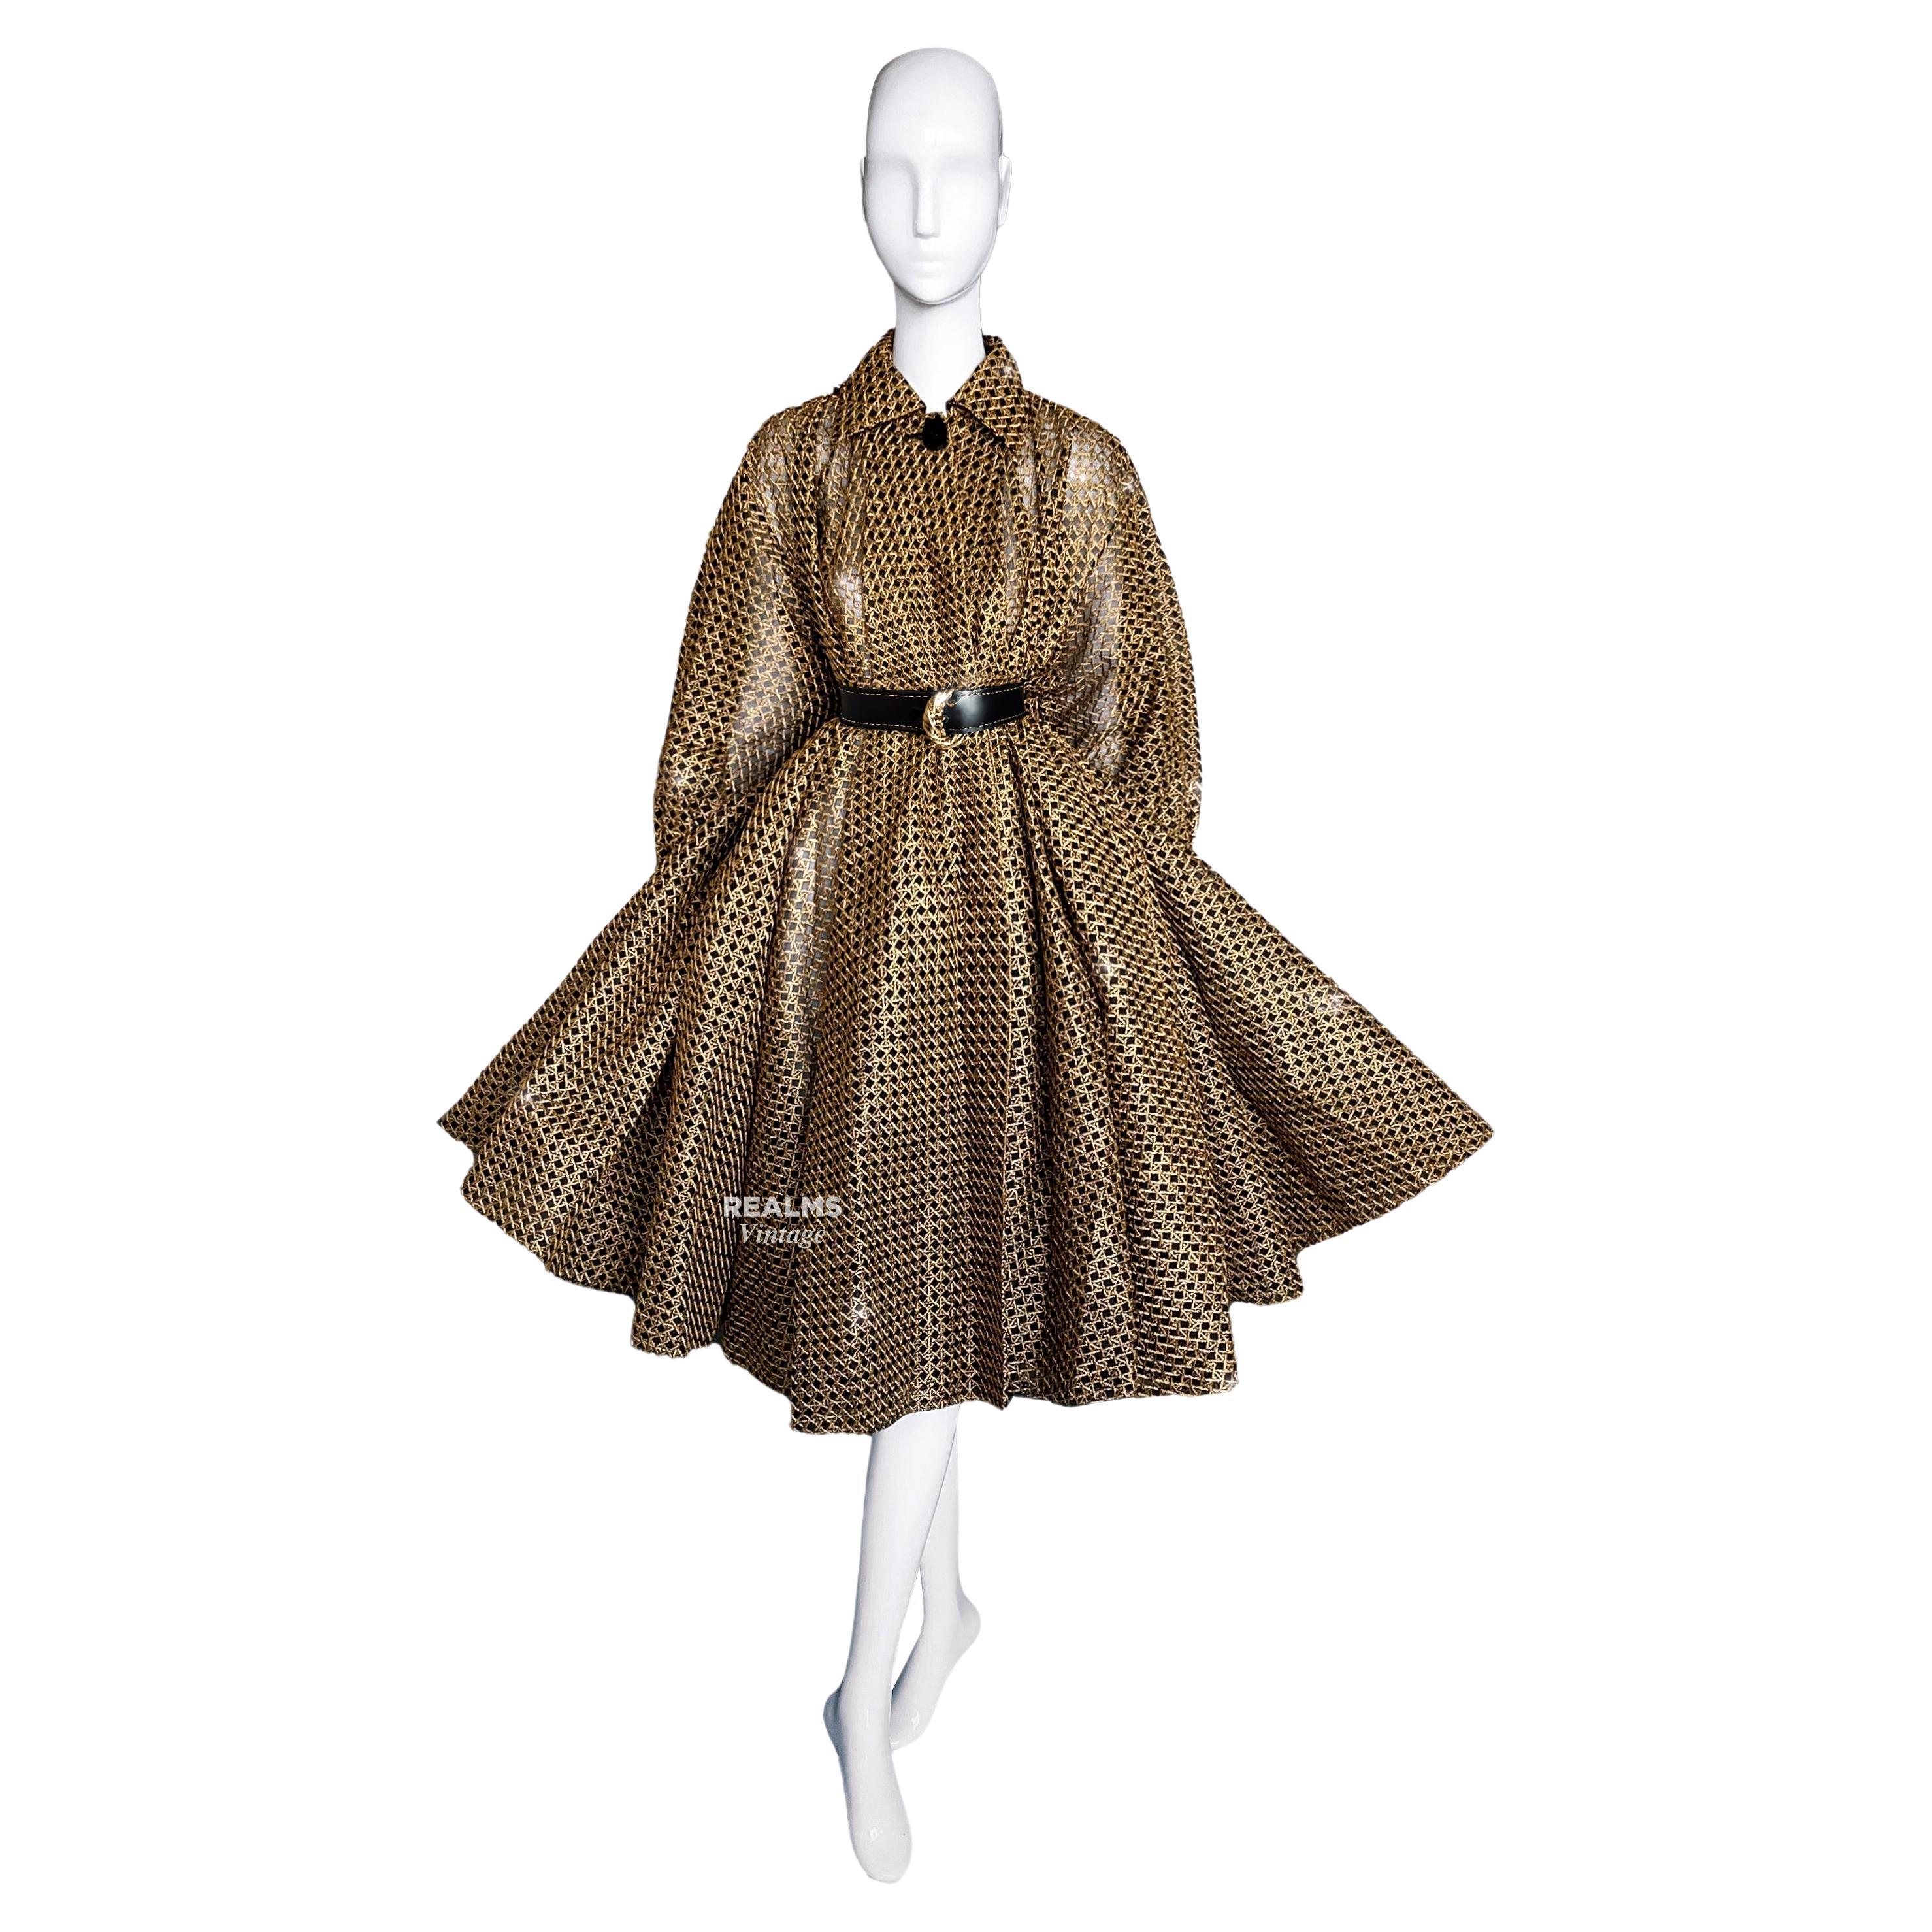 CHRISTIAN DIOR Archival SS 1991 Spectacular Coat Dress Swing Overcoat  For Sale